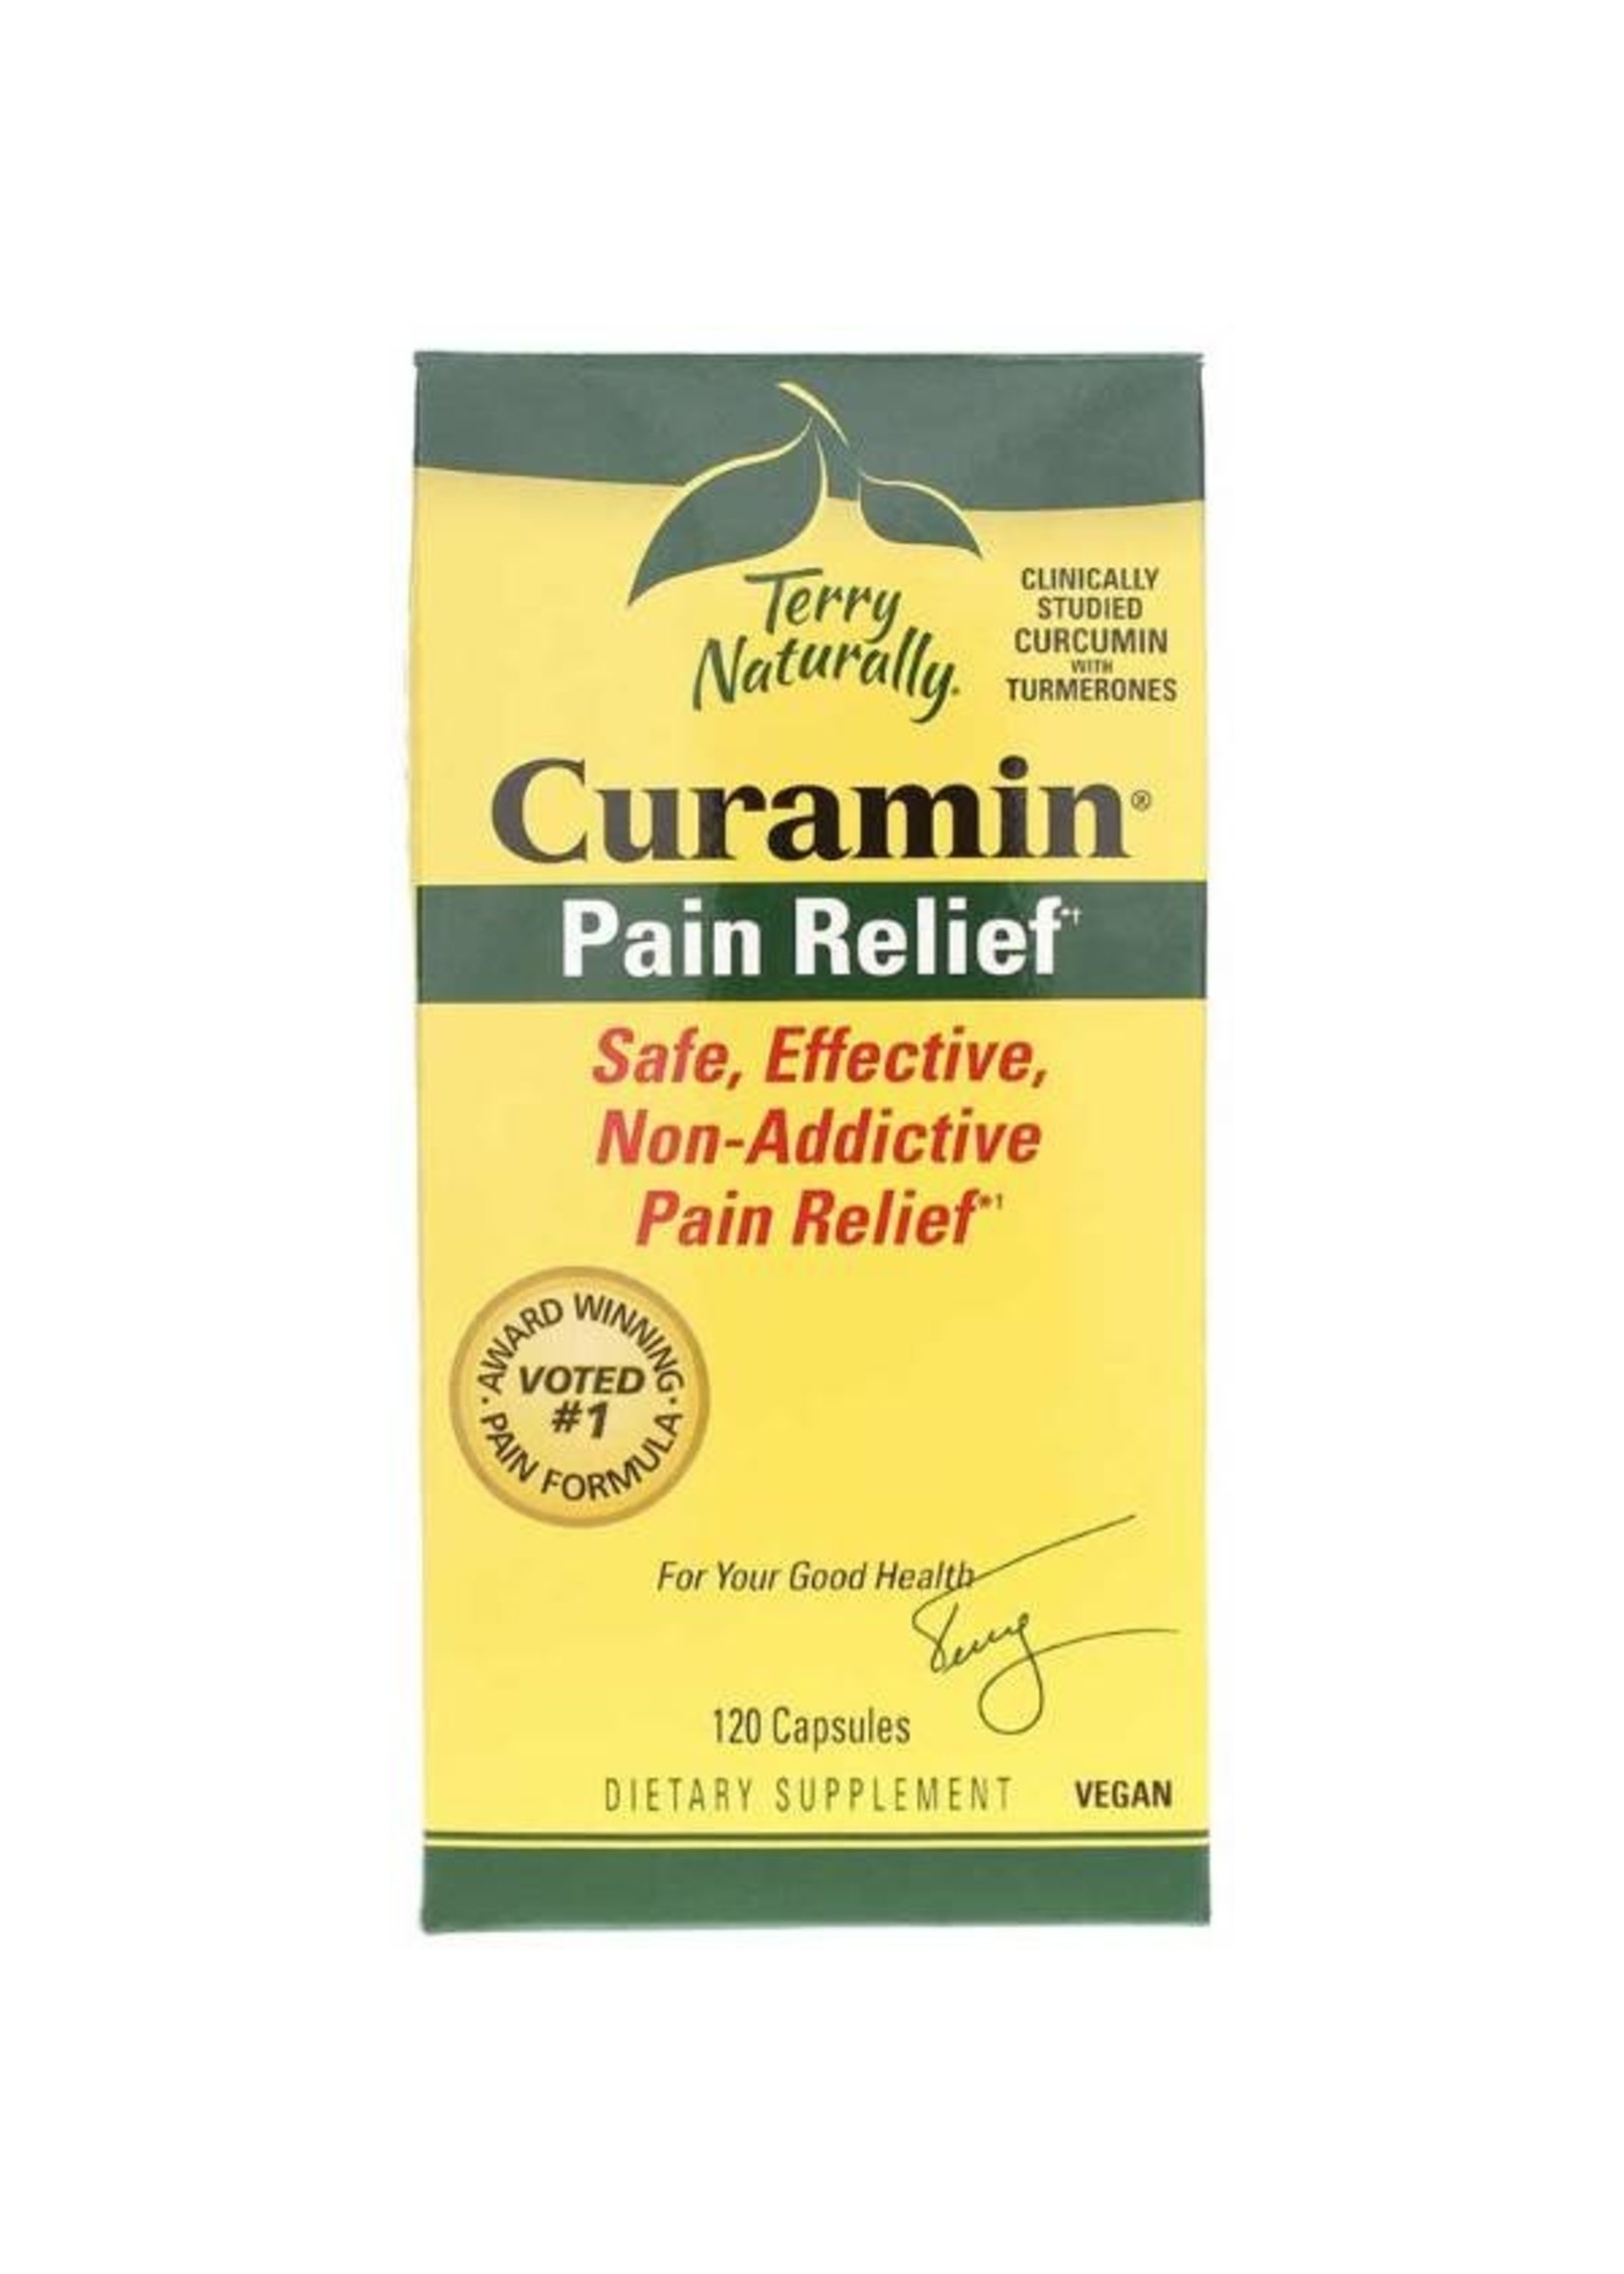 Terry Naturally Curamin Pain Relief 120 capsules